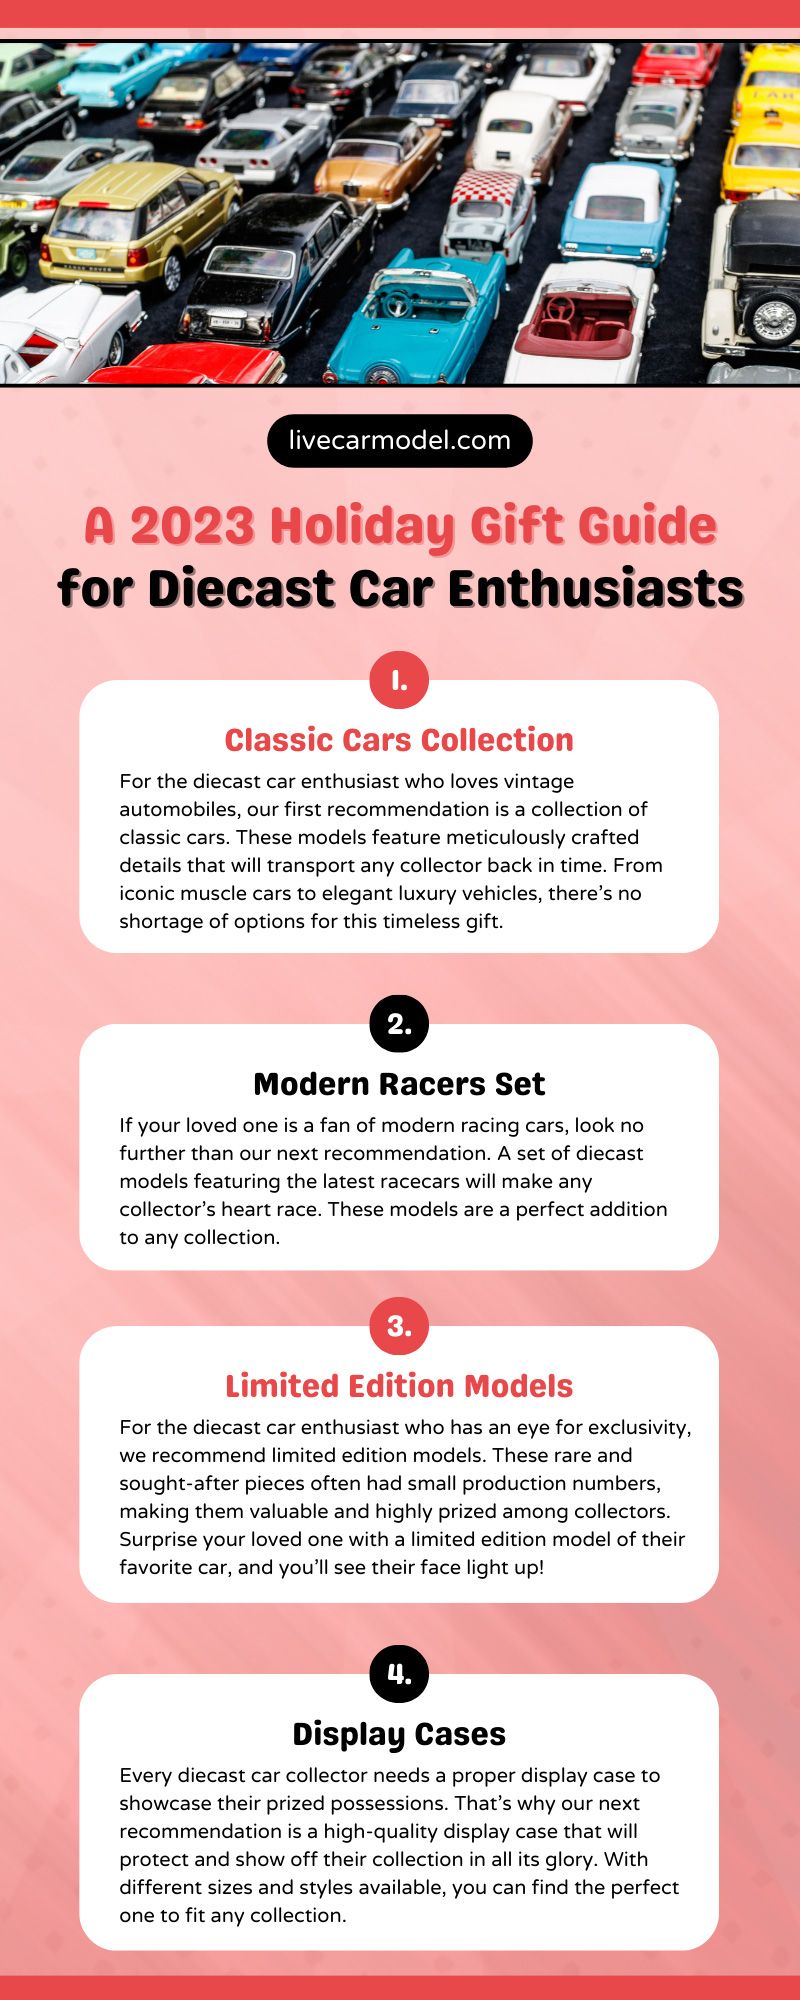 A 2023 Holiday Gift Guide for Diecast Car Enthusiasts